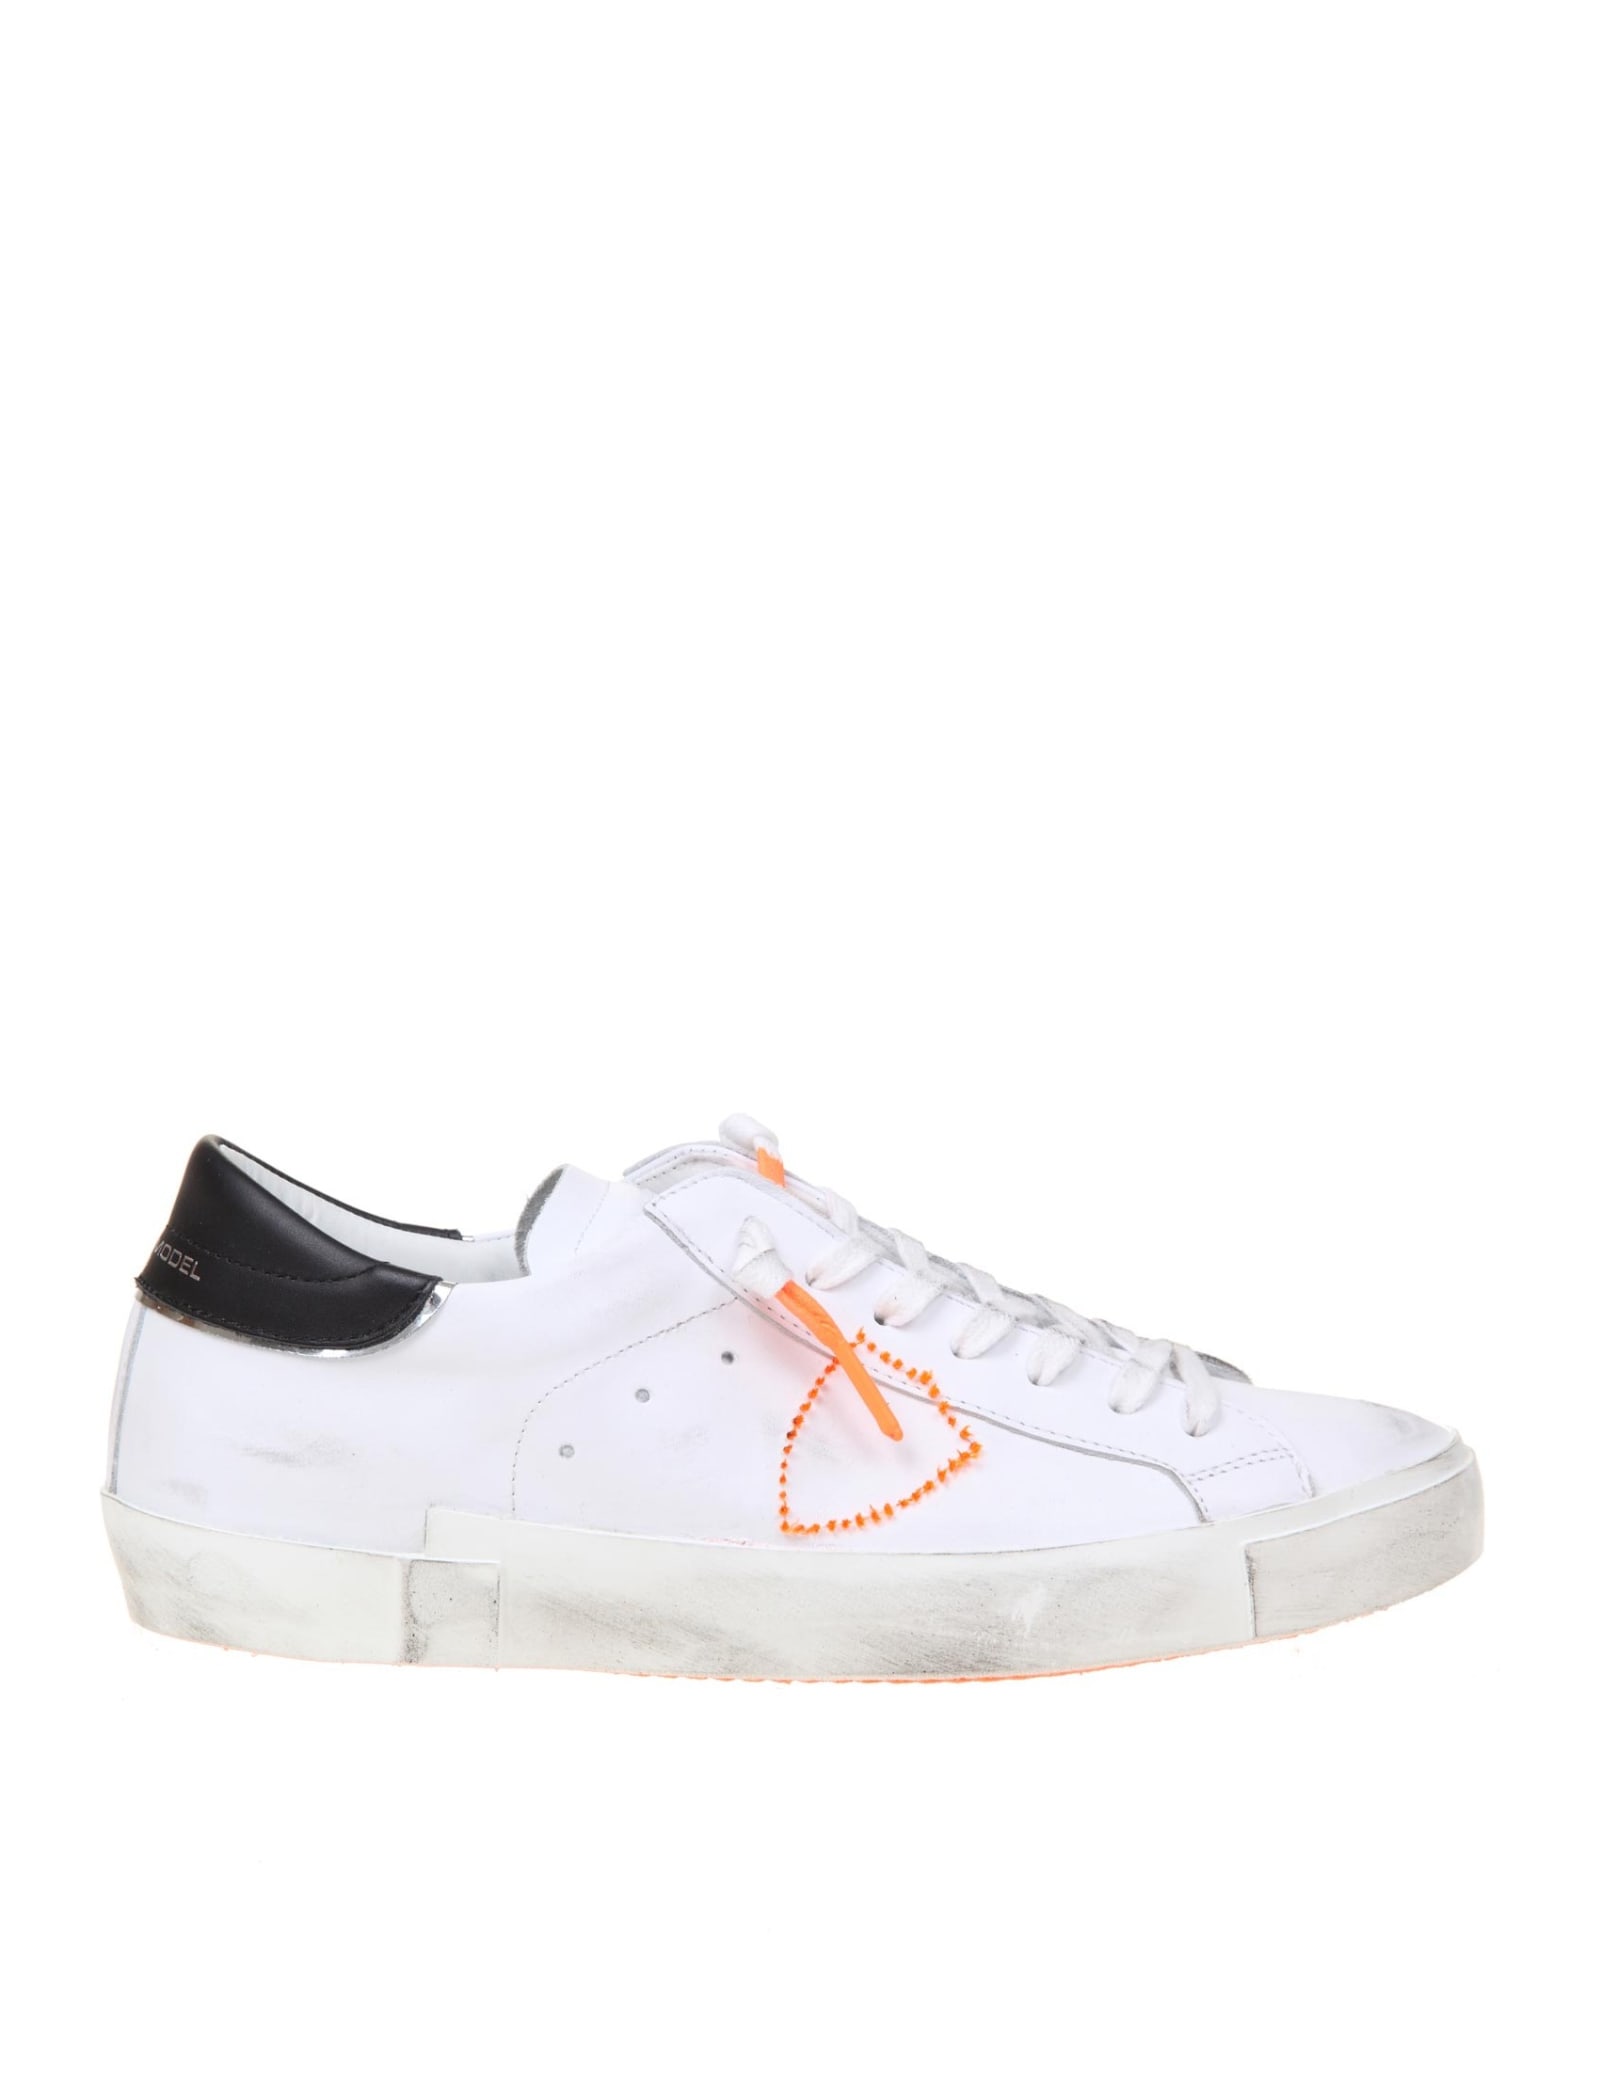 Philippe Model High Sneakers In White Leather